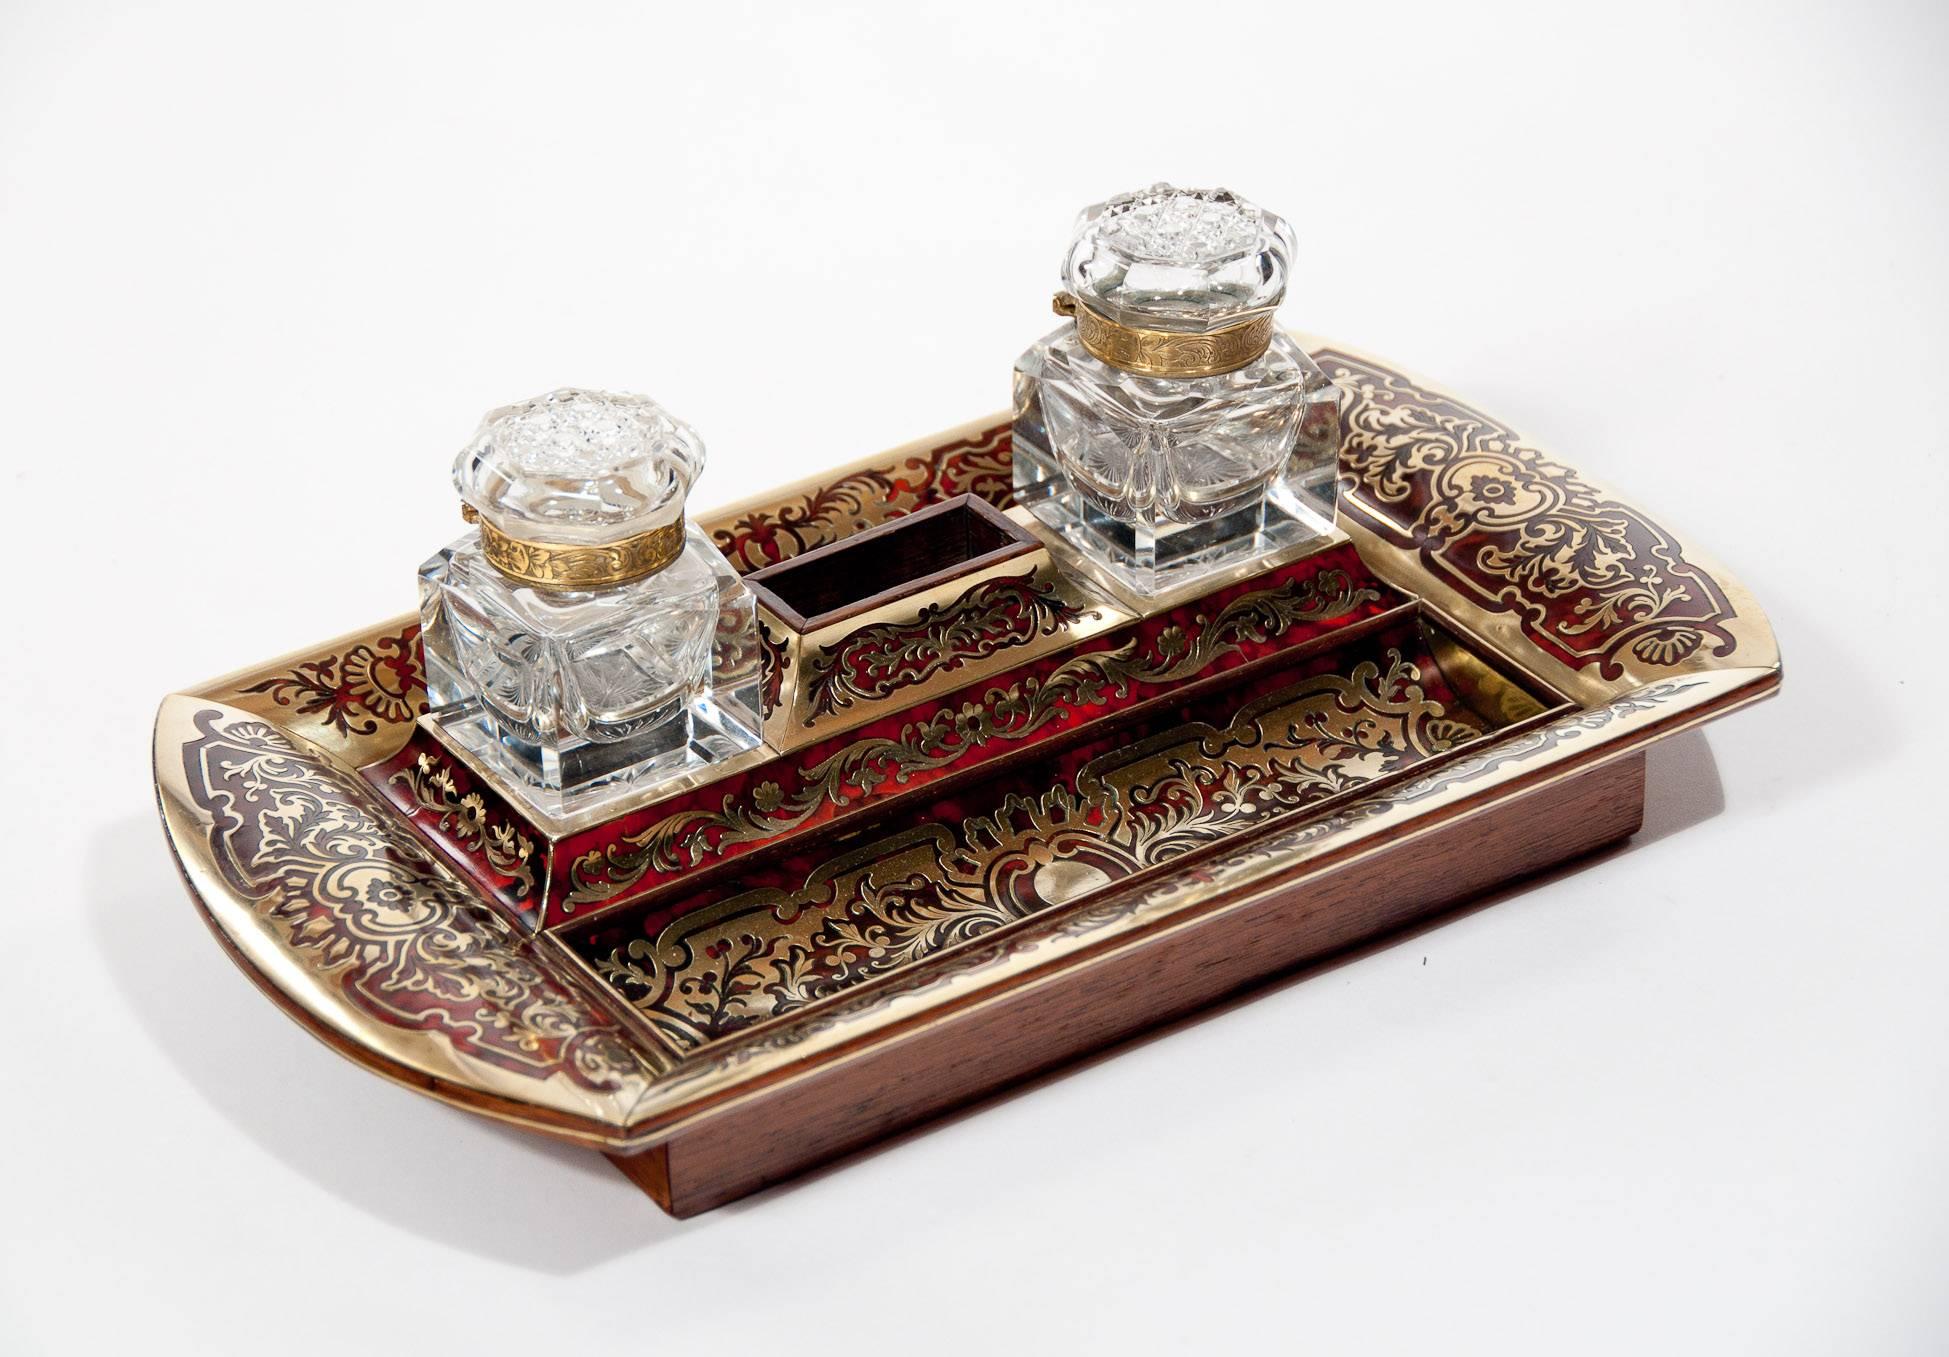 An exceptional quality French Boulle inkstand / inkwell dating to circa 1830. 
This beautiful Boulle marquetry inkstand is made from solid rosewood covered in gorgeous red tortoiseshell and finely inlaid with fretted brasswork. 

This combination